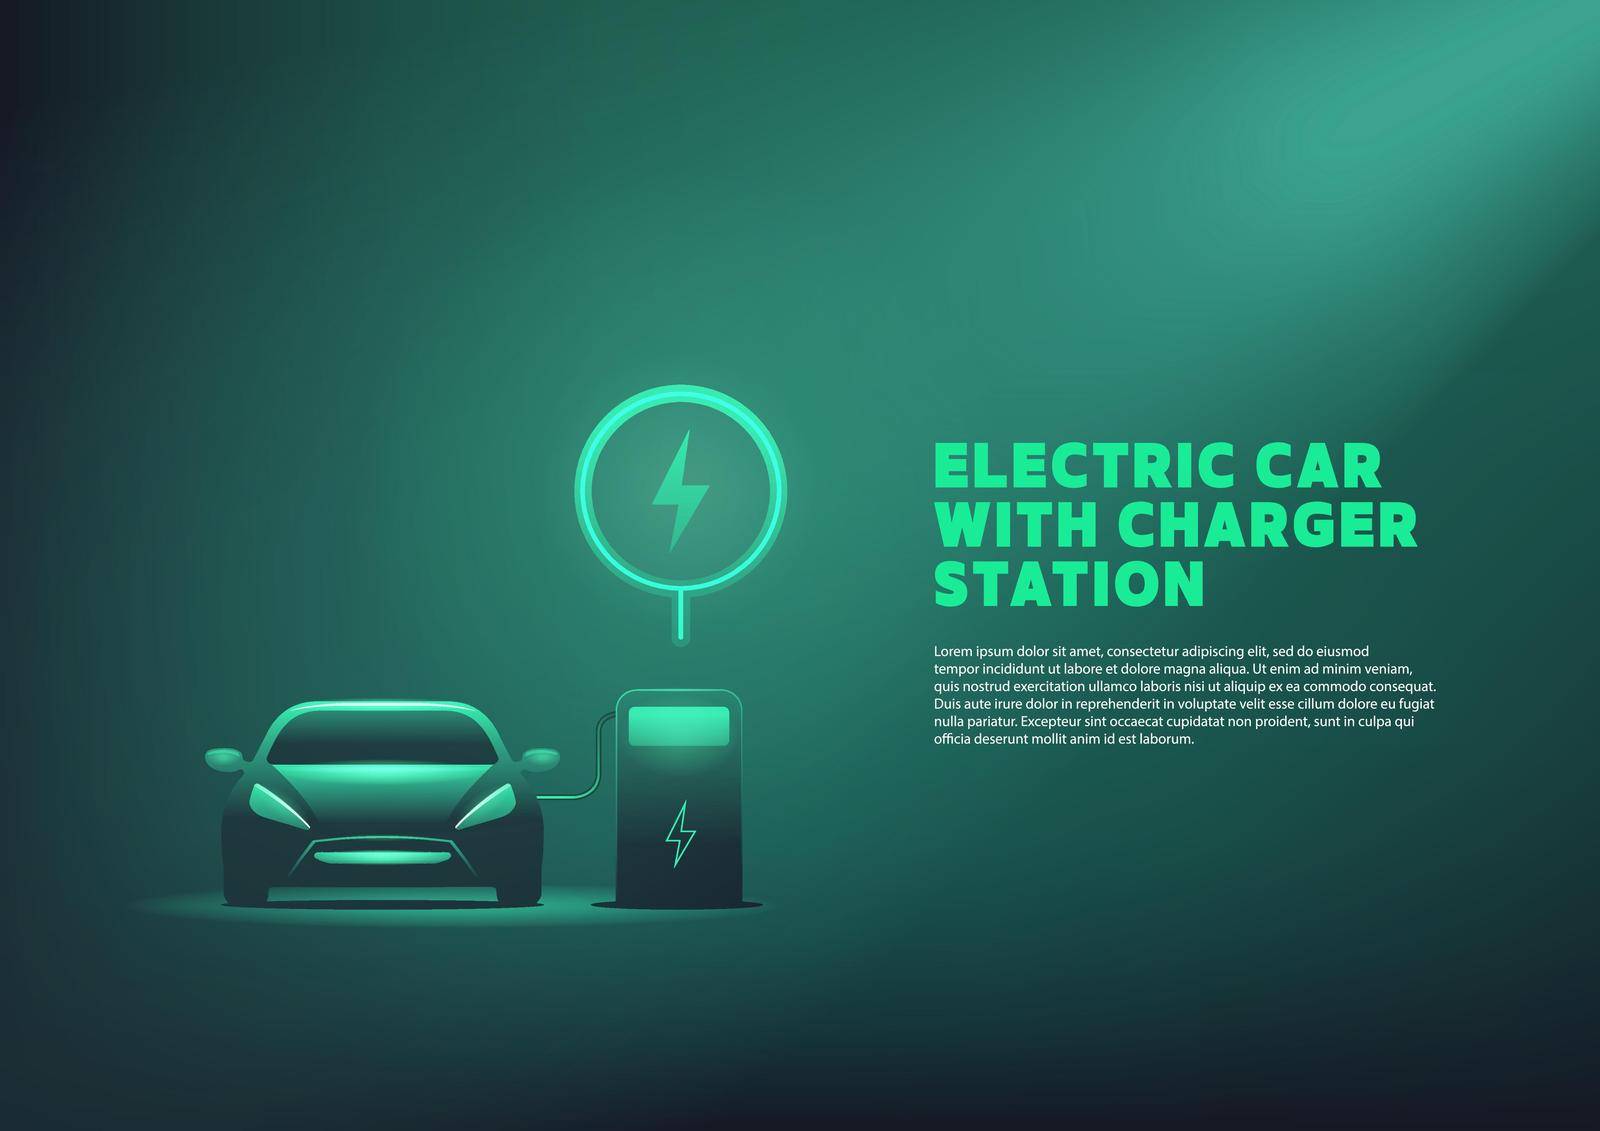 EV Car or Electric charging at the charger station with the power cable supply plugged in. by windawake